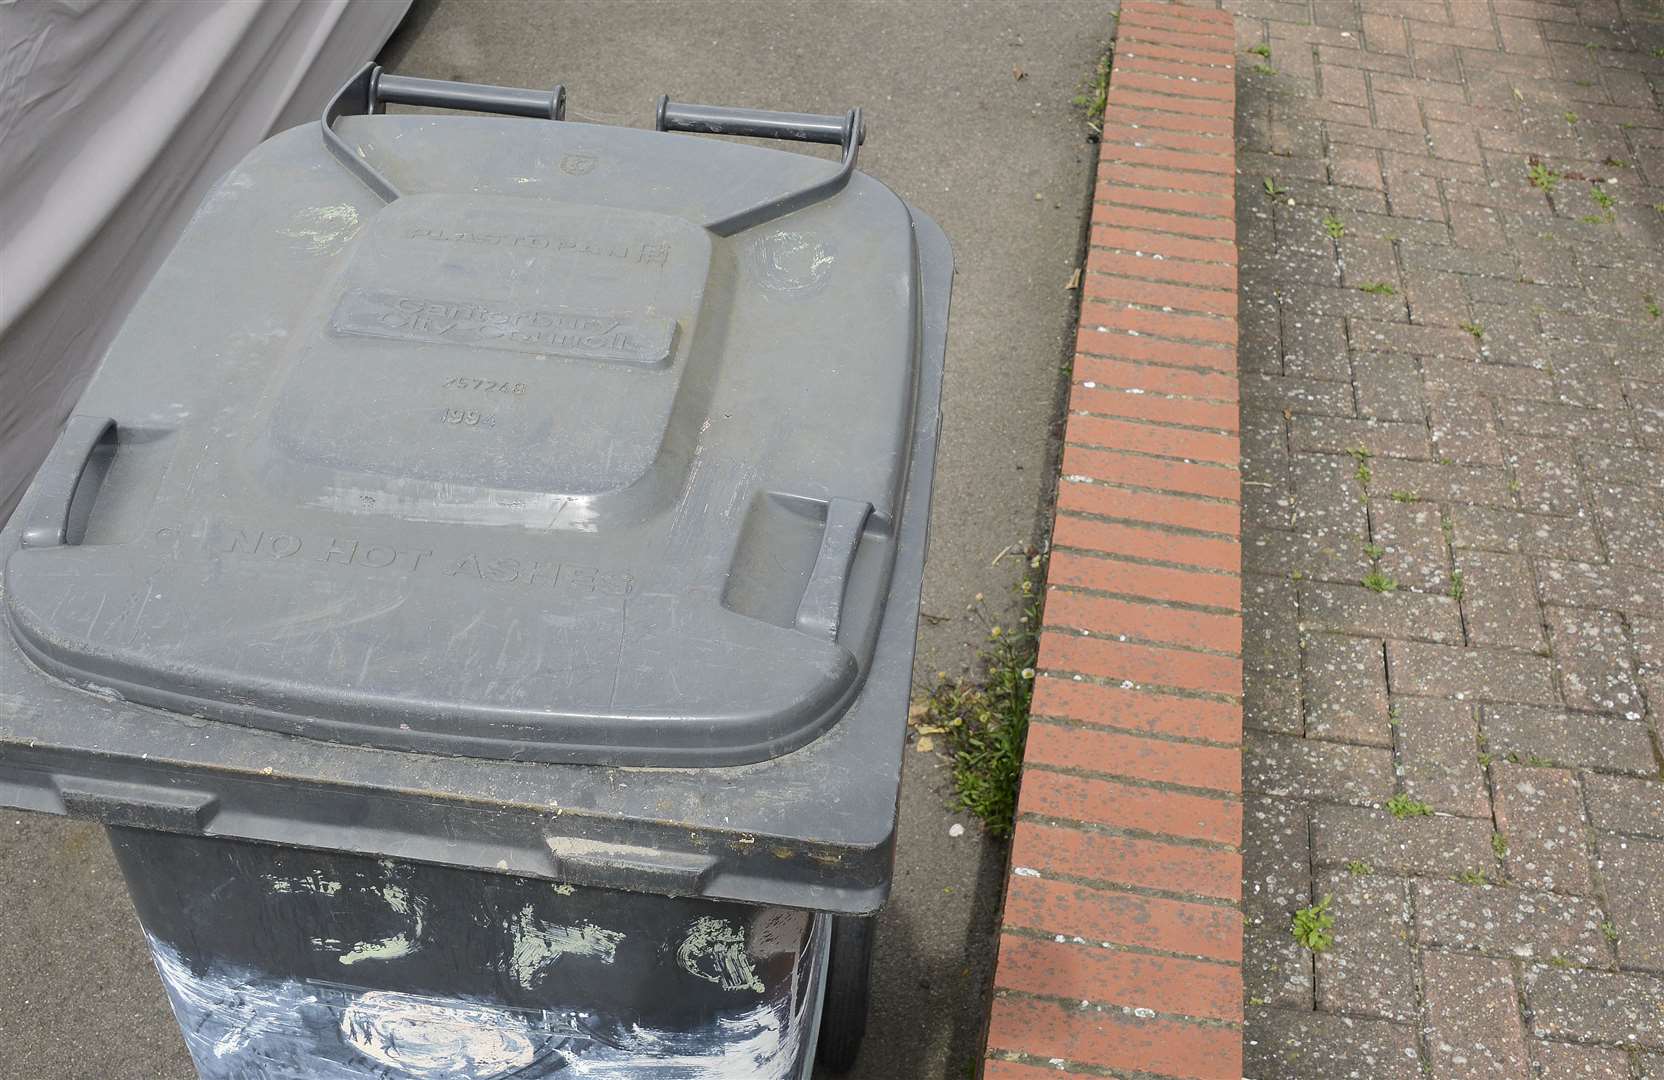 “The bins are put out straight at the top of the driveway, where they aren’t in my way"